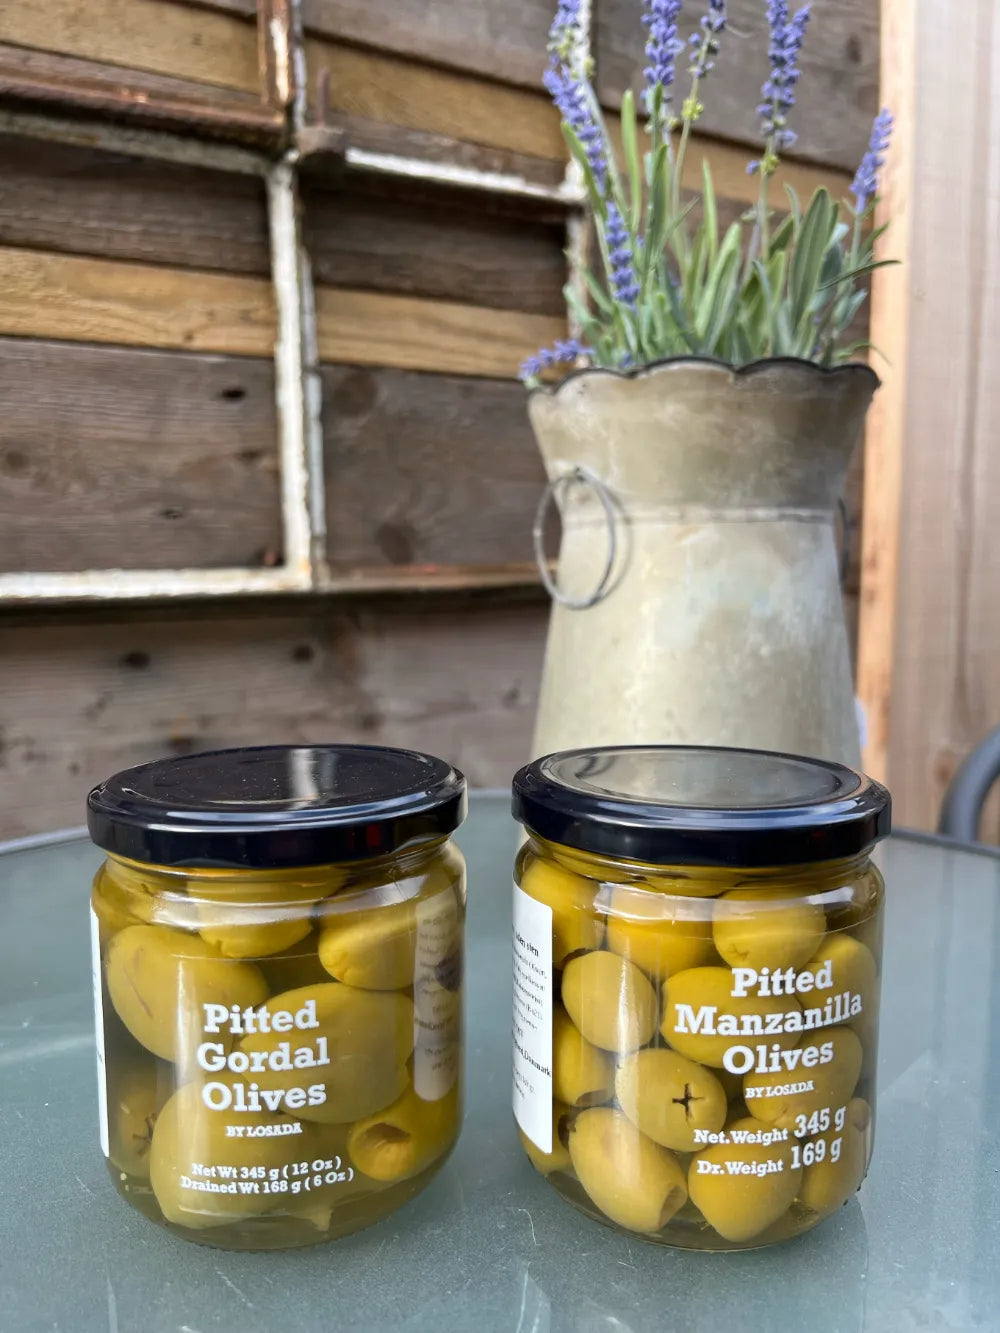 Spice by Spice, Pitted Gordal Olives